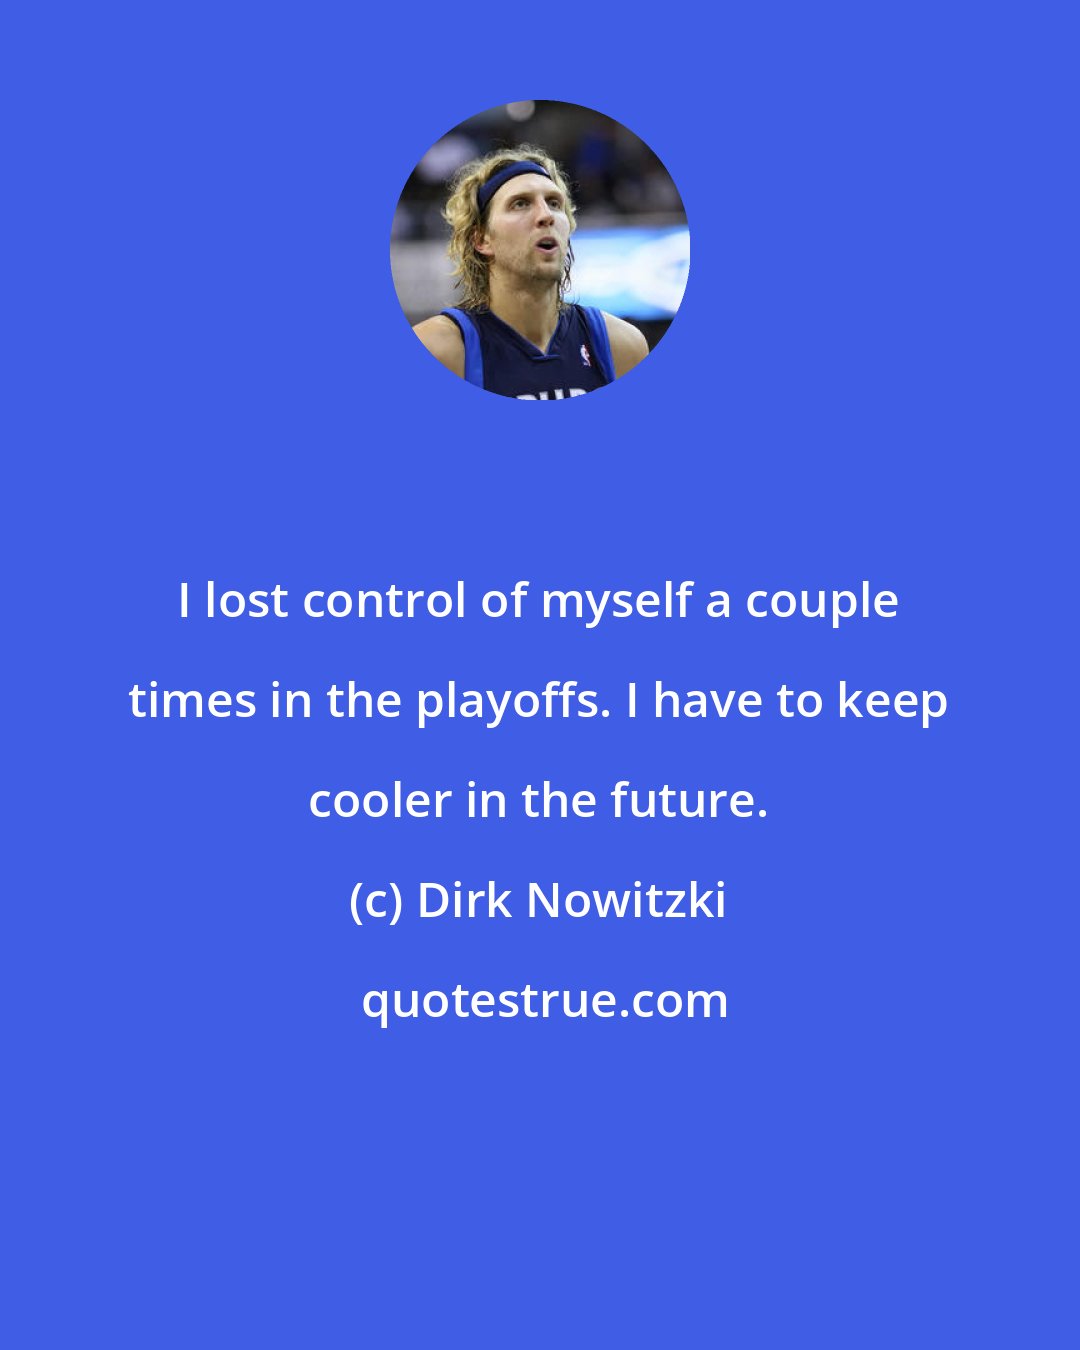 Dirk Nowitzki: I lost control of myself a couple times in the playoffs. I have to keep cooler in the future.